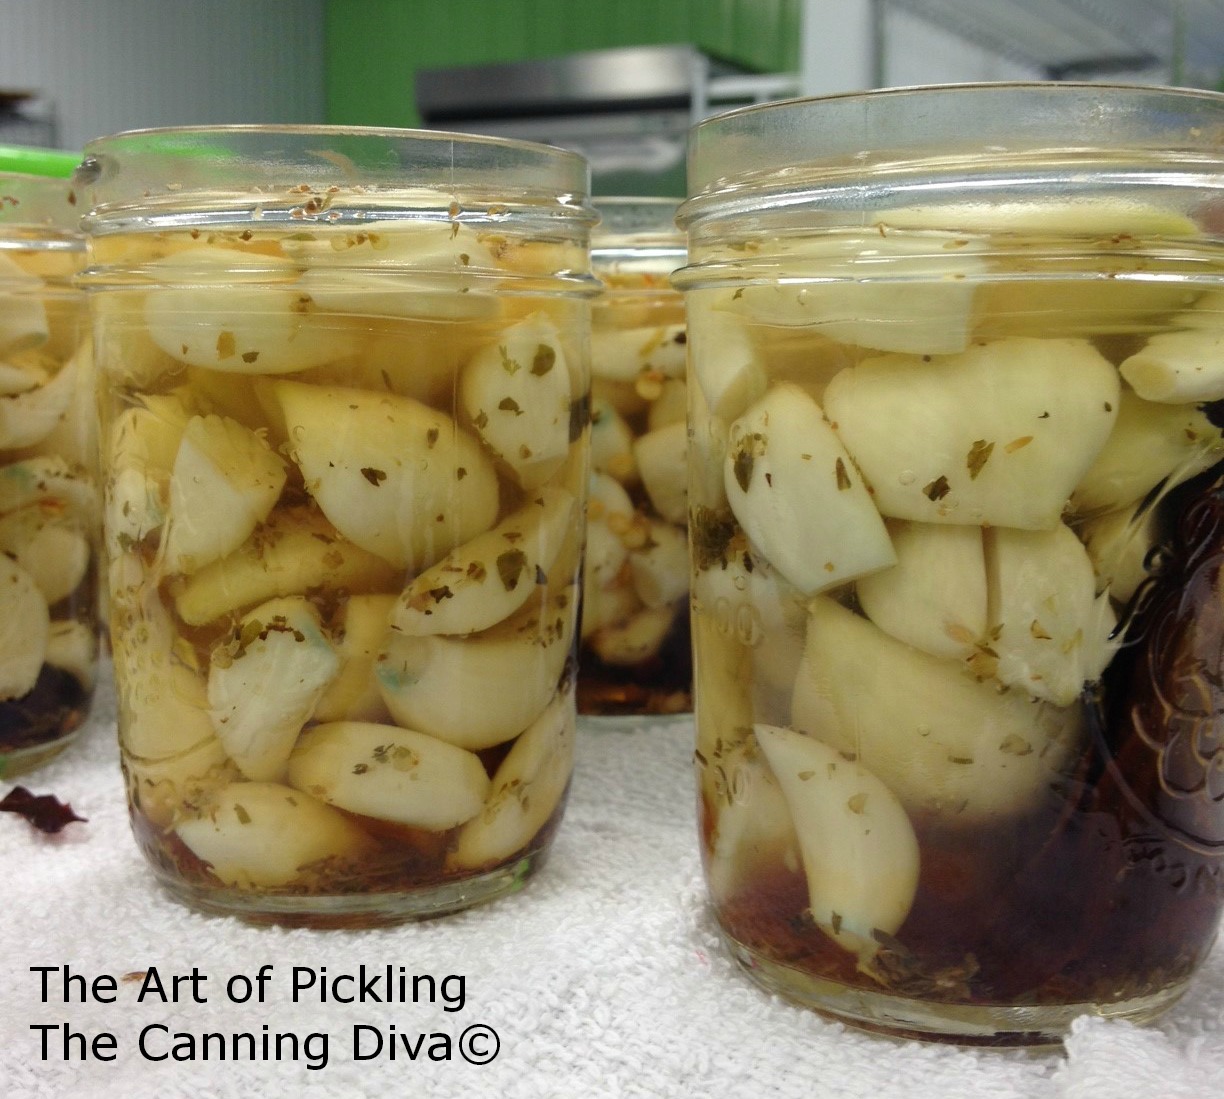 The Art of Pickling | The Canning Diva